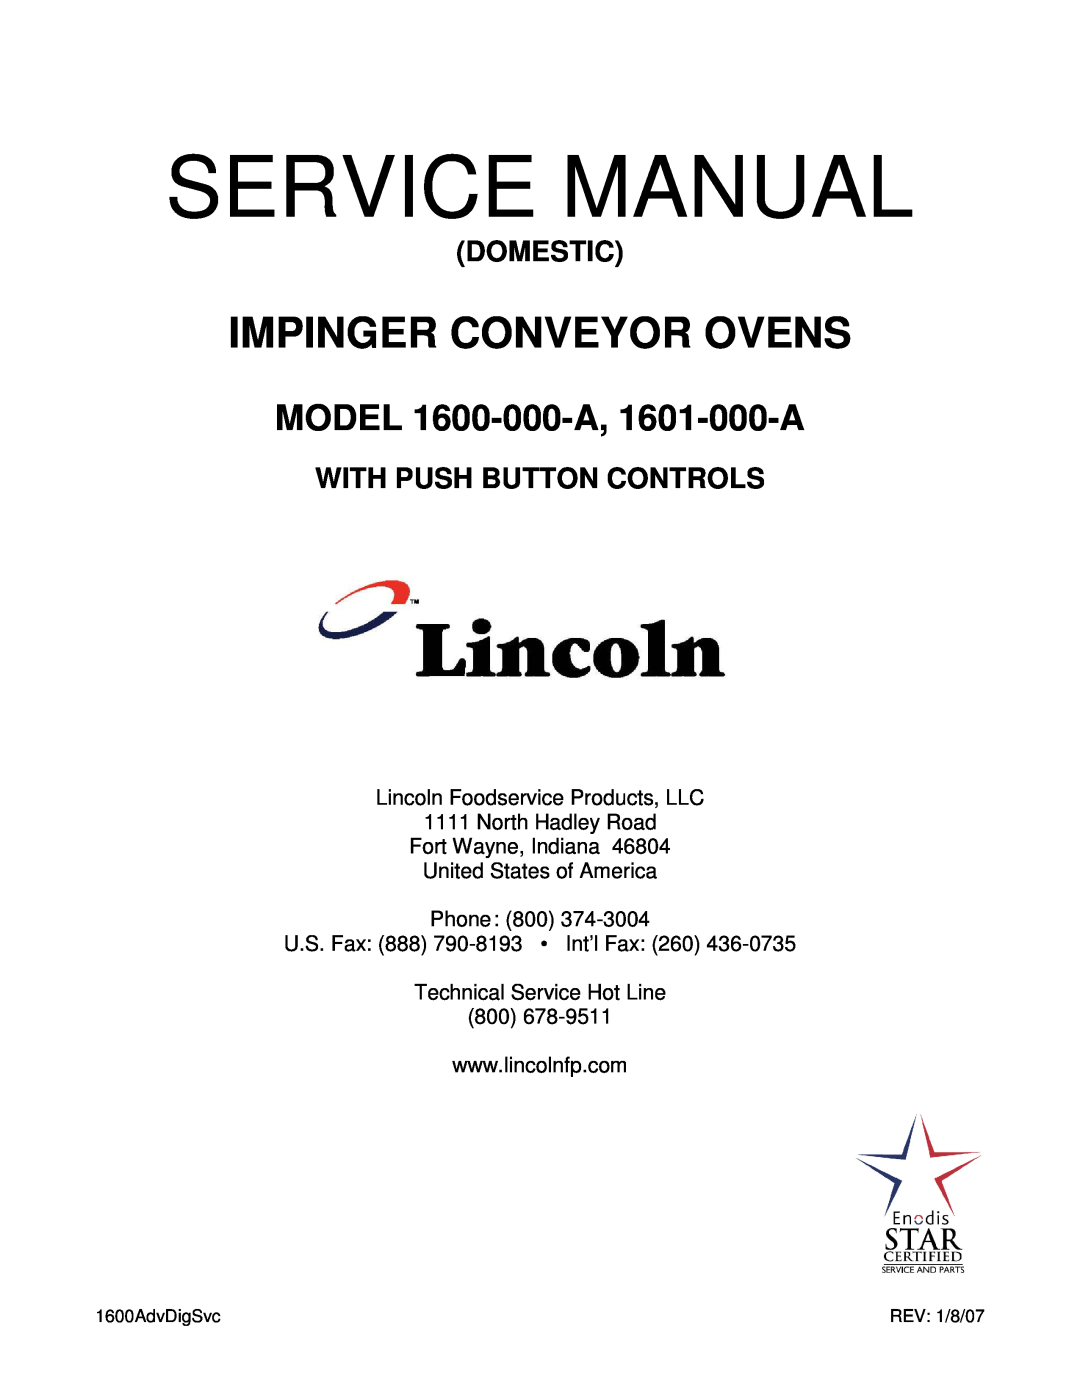 Lincoln service manual Service Manual, Impinger Conveyor Ovens, MODEL 1600-000-A, 1601-000-A, Domestic 